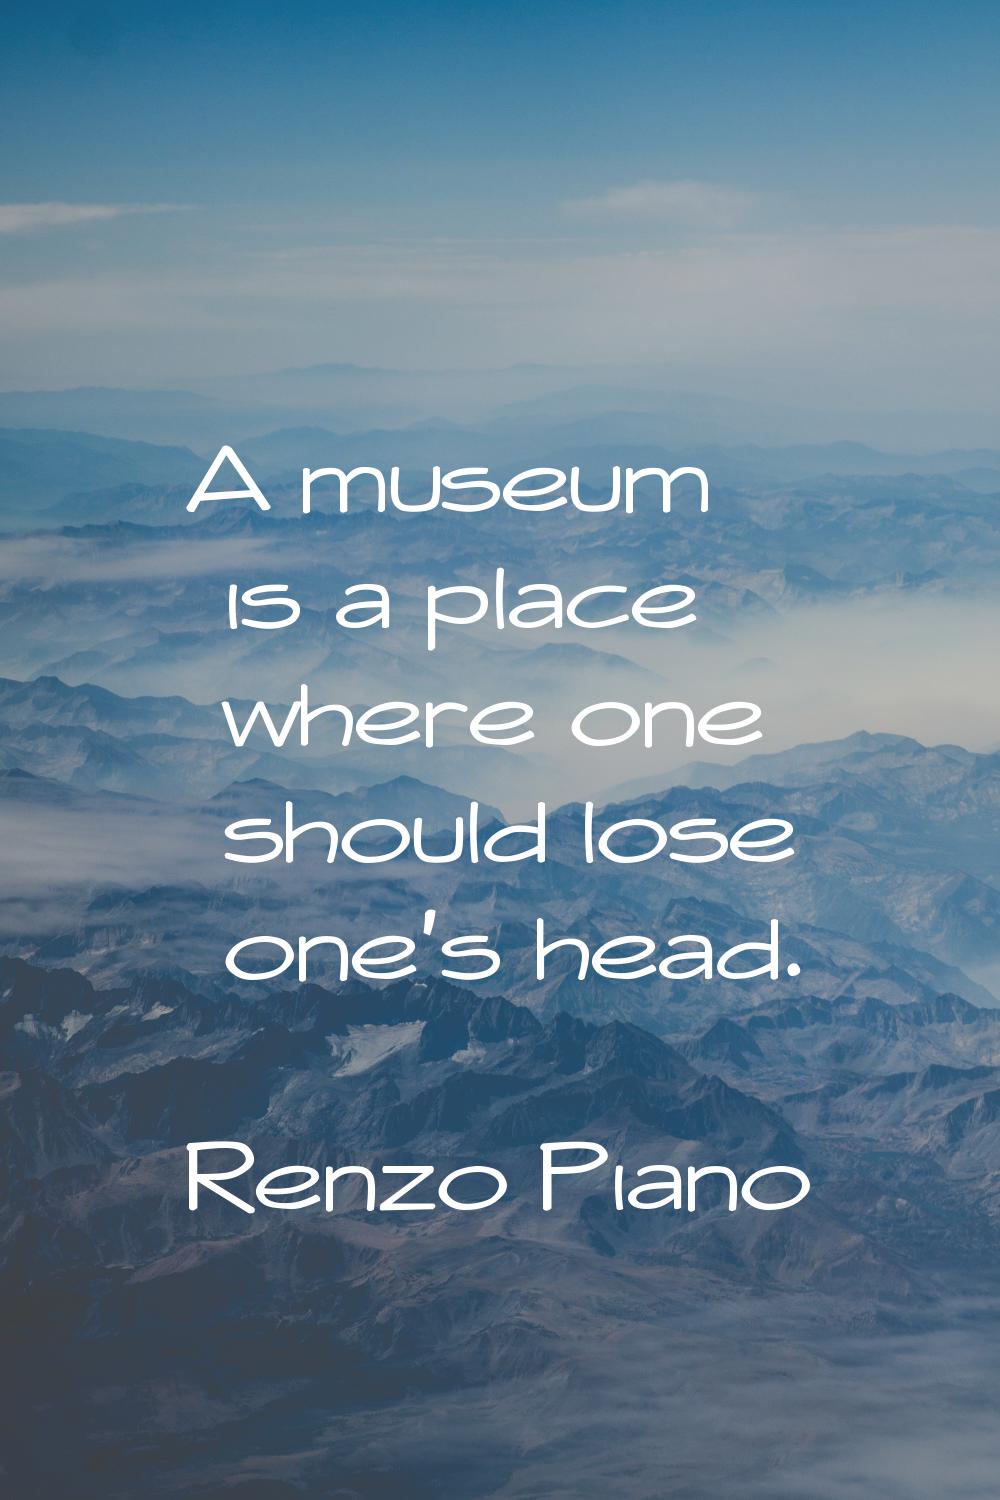 A museum is a place where one should lose one's head.